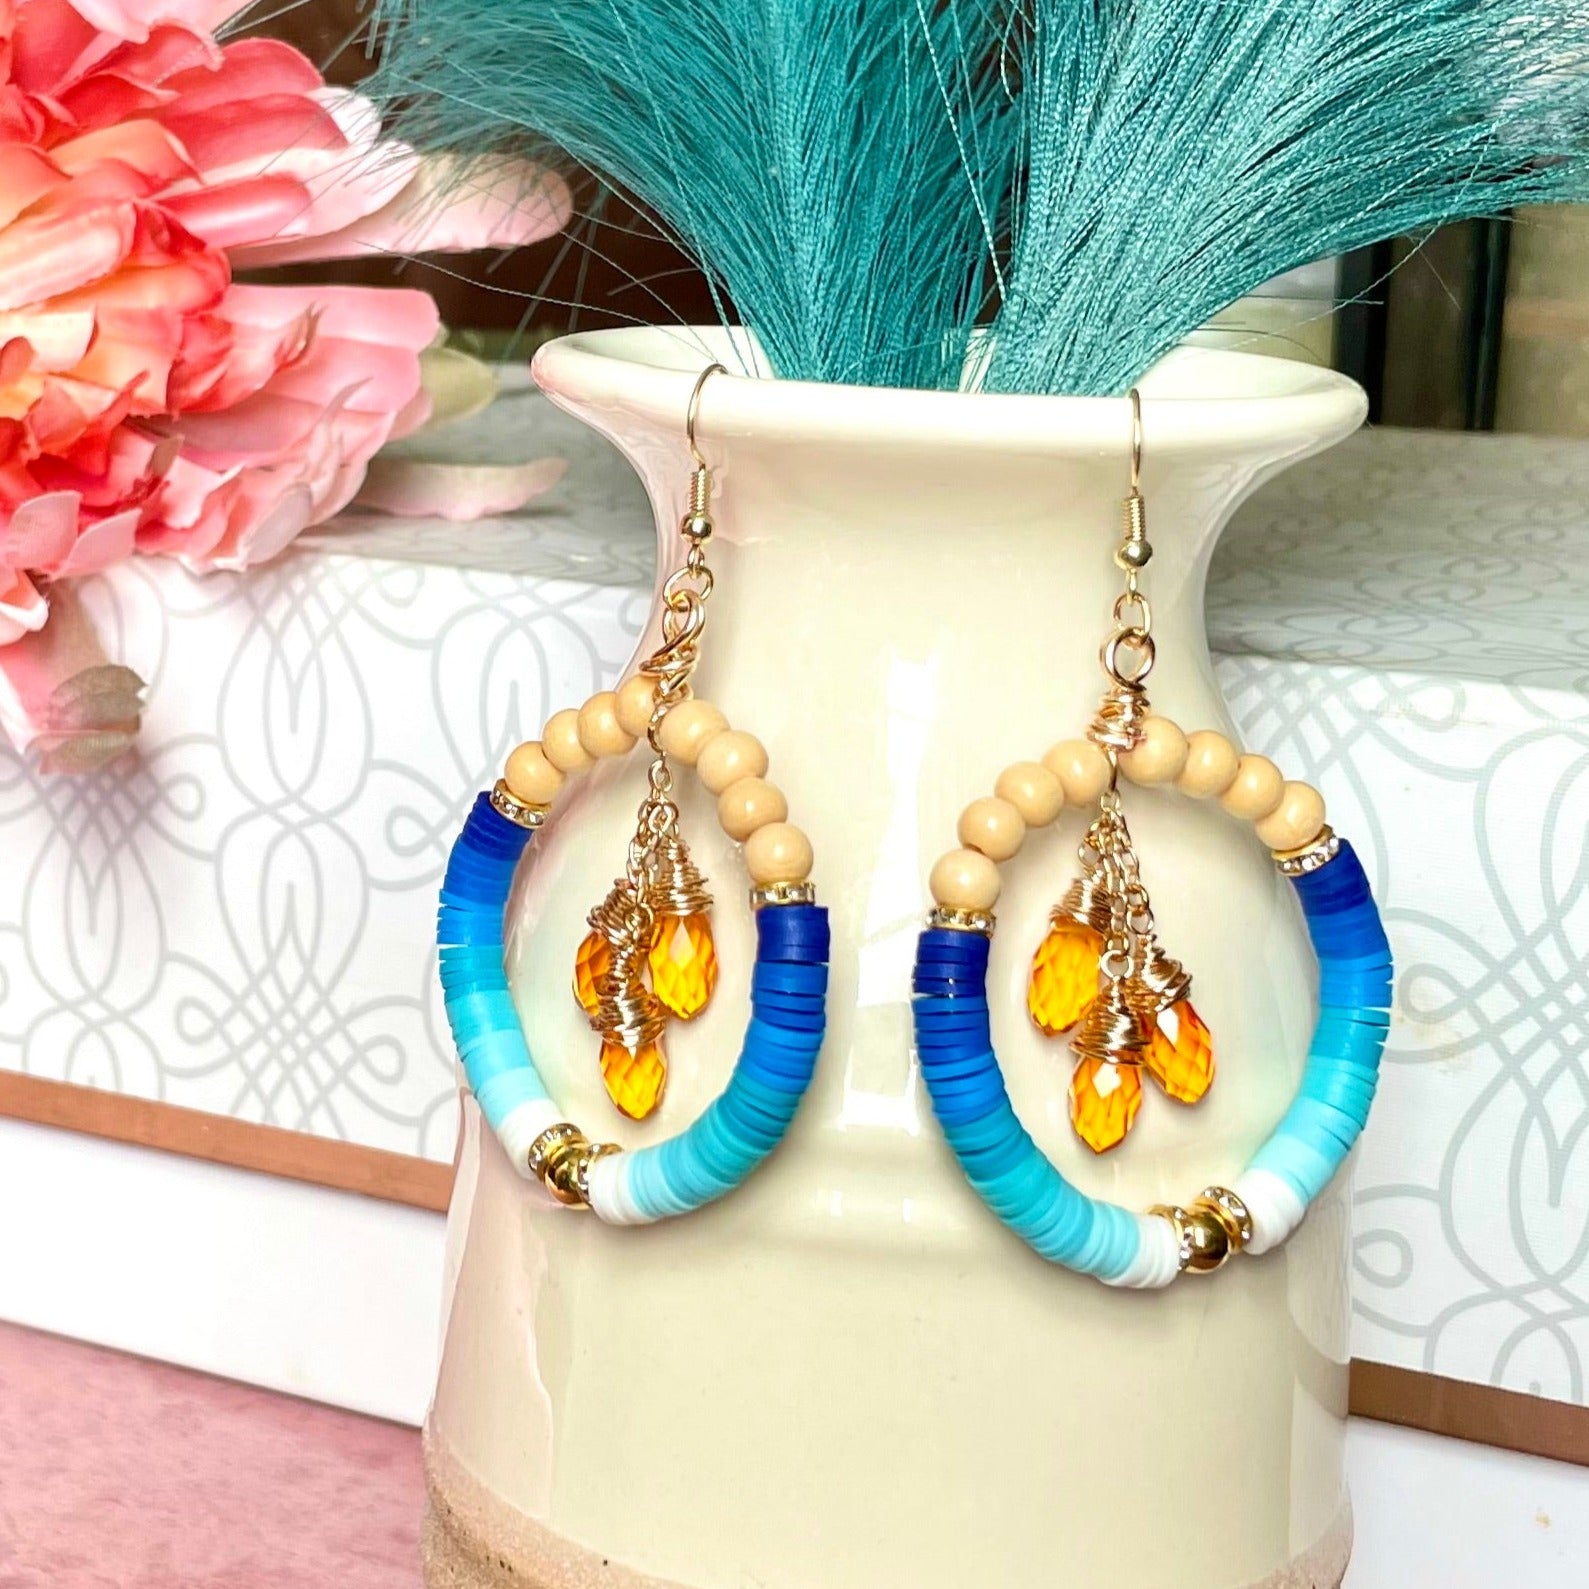 Ombre Blue Clay Bead and Wooden Earrings with Citrine Dangles